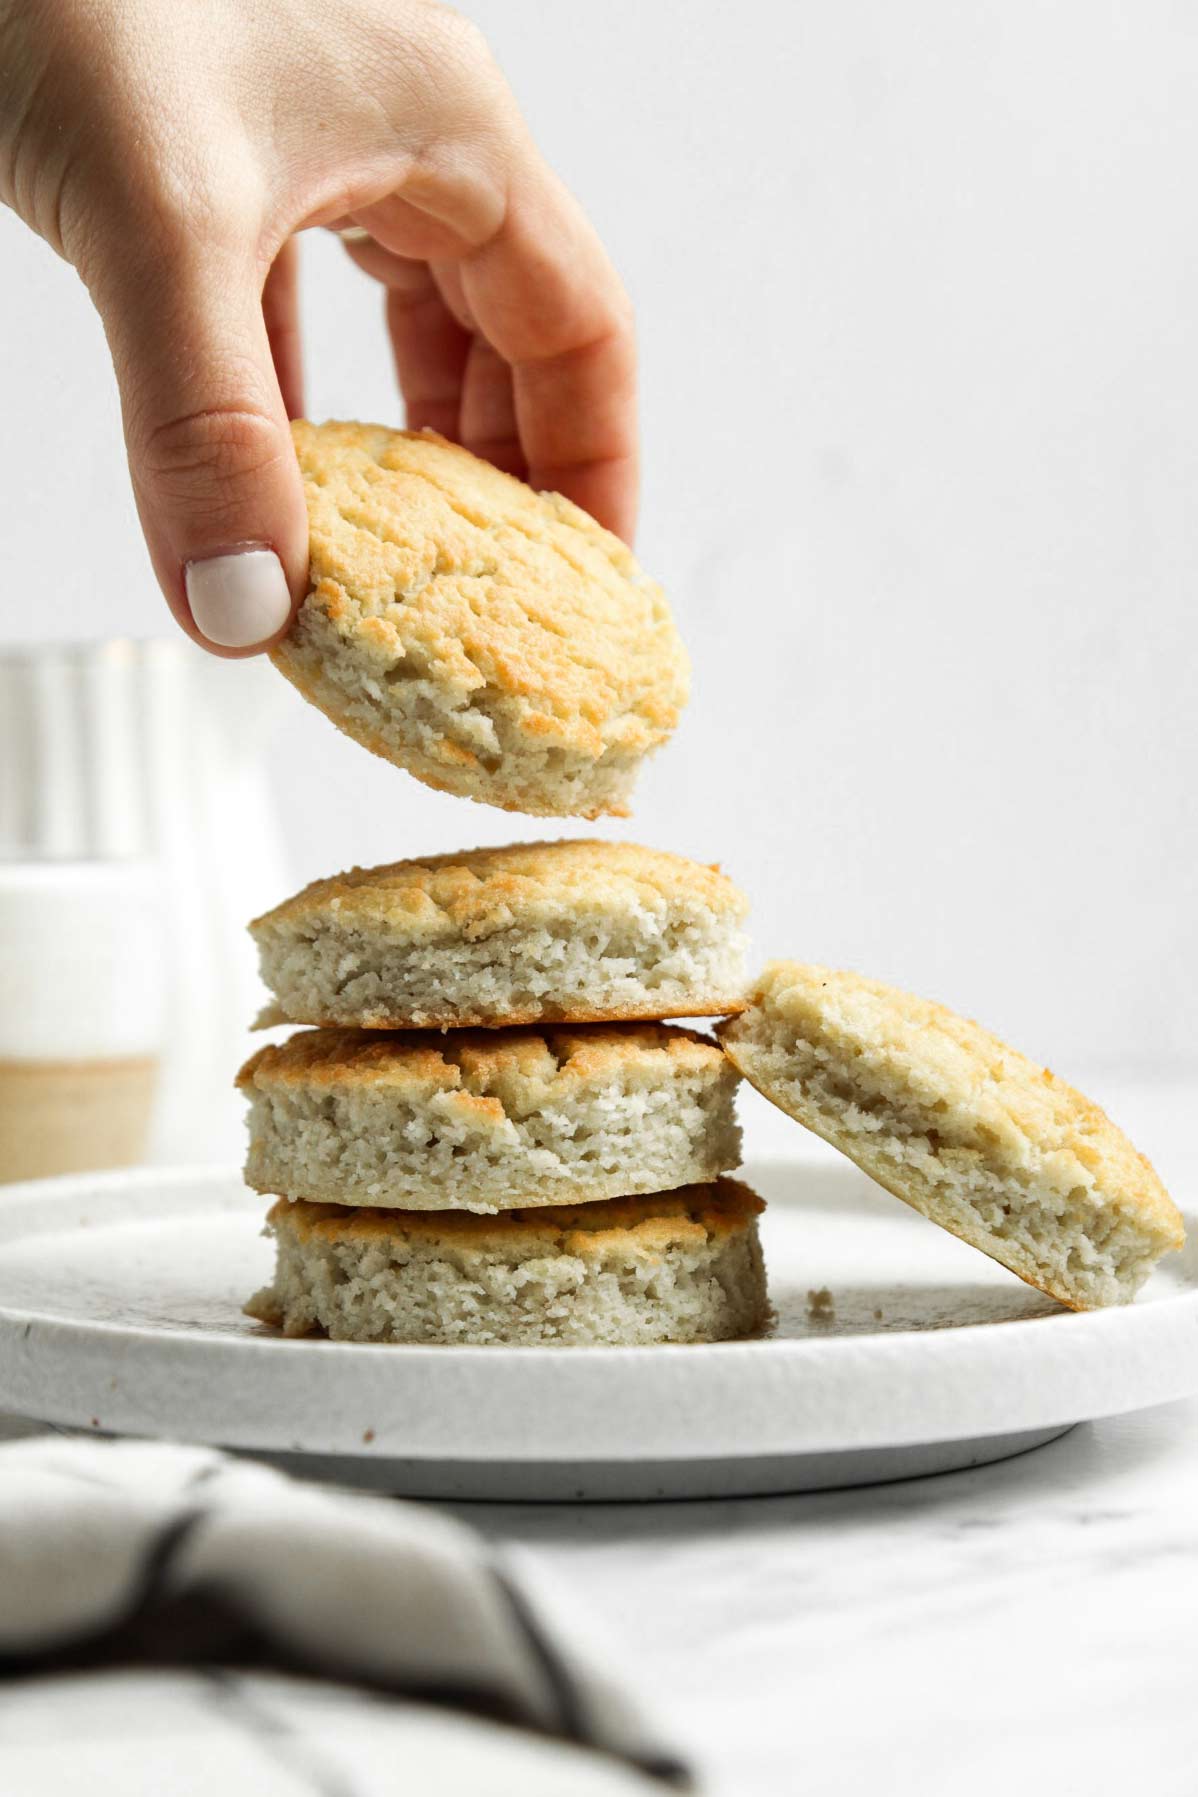 Hand taking one from a stack of coconut flour biscuits on small white plate